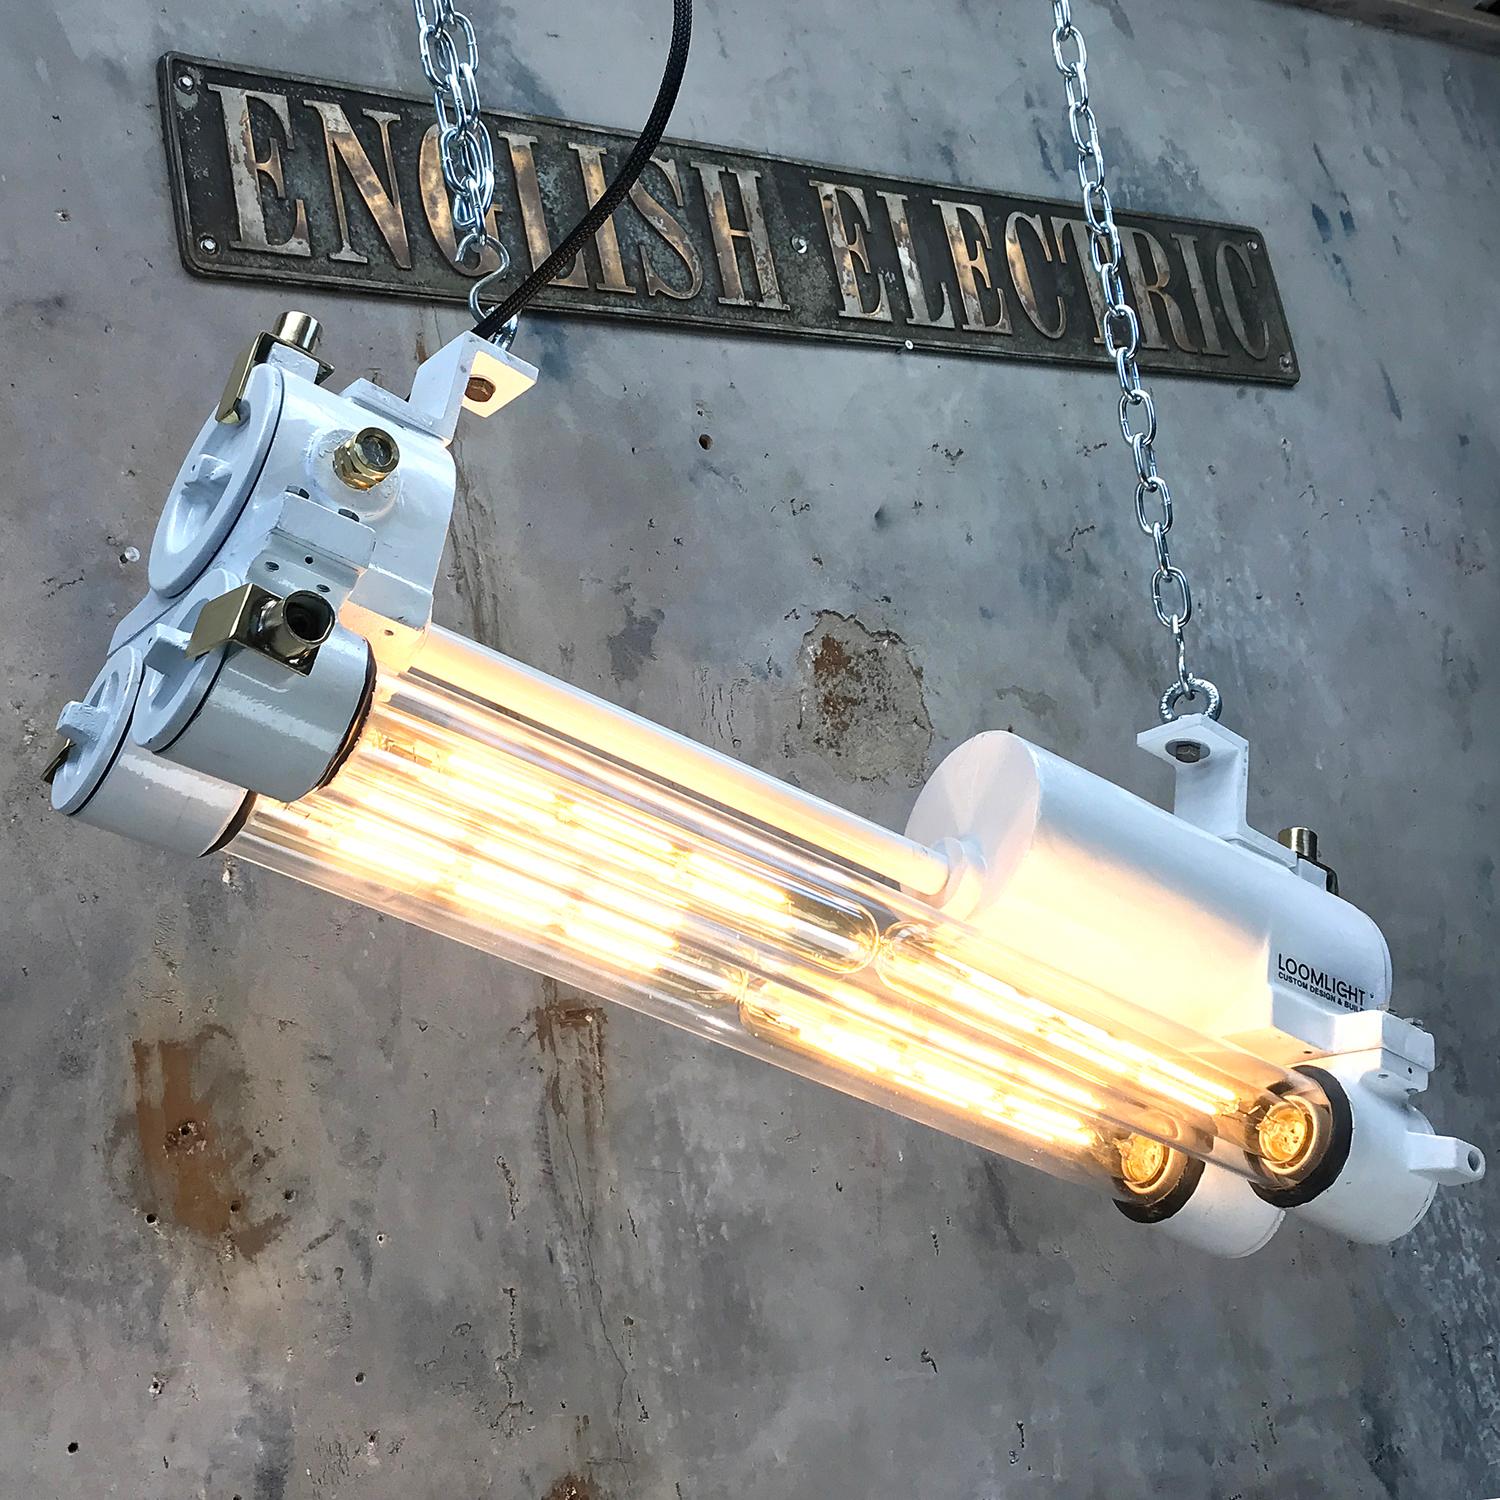 Korean flame proof edison LED twin strip light with gloss white finish.

A real example of vintage Industrial lighting that you just don't see these days, in fact it would have been impossible to buy these back when they where manufactured as they